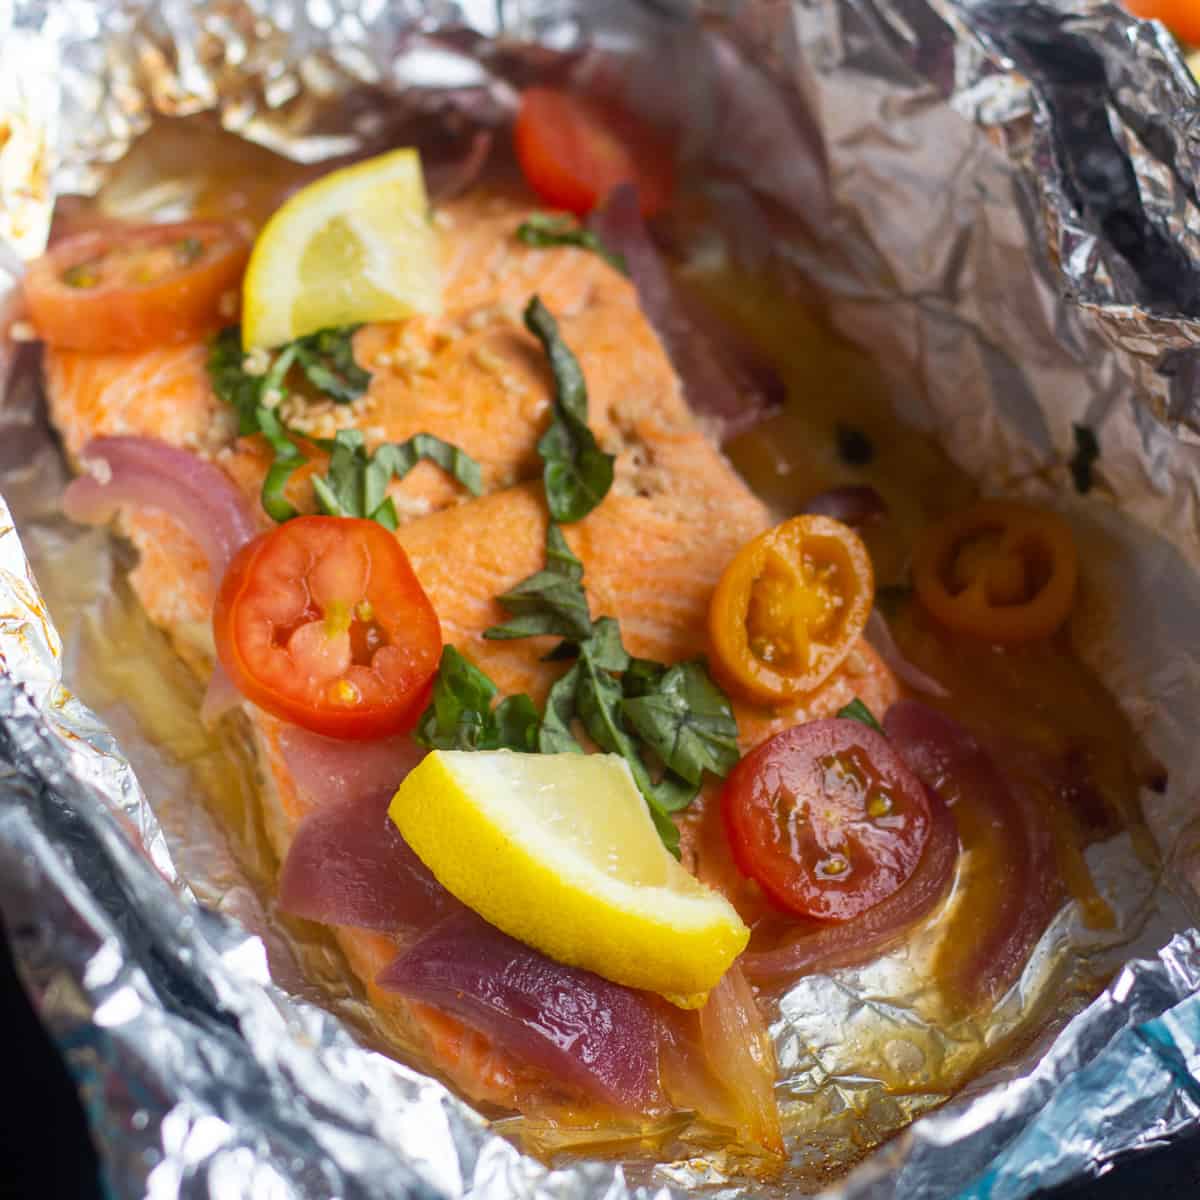 Baked salmon in foil perfect for a weeknight dinner. This easy salmon recipe is ready in 25 minutes and is so delicious!
